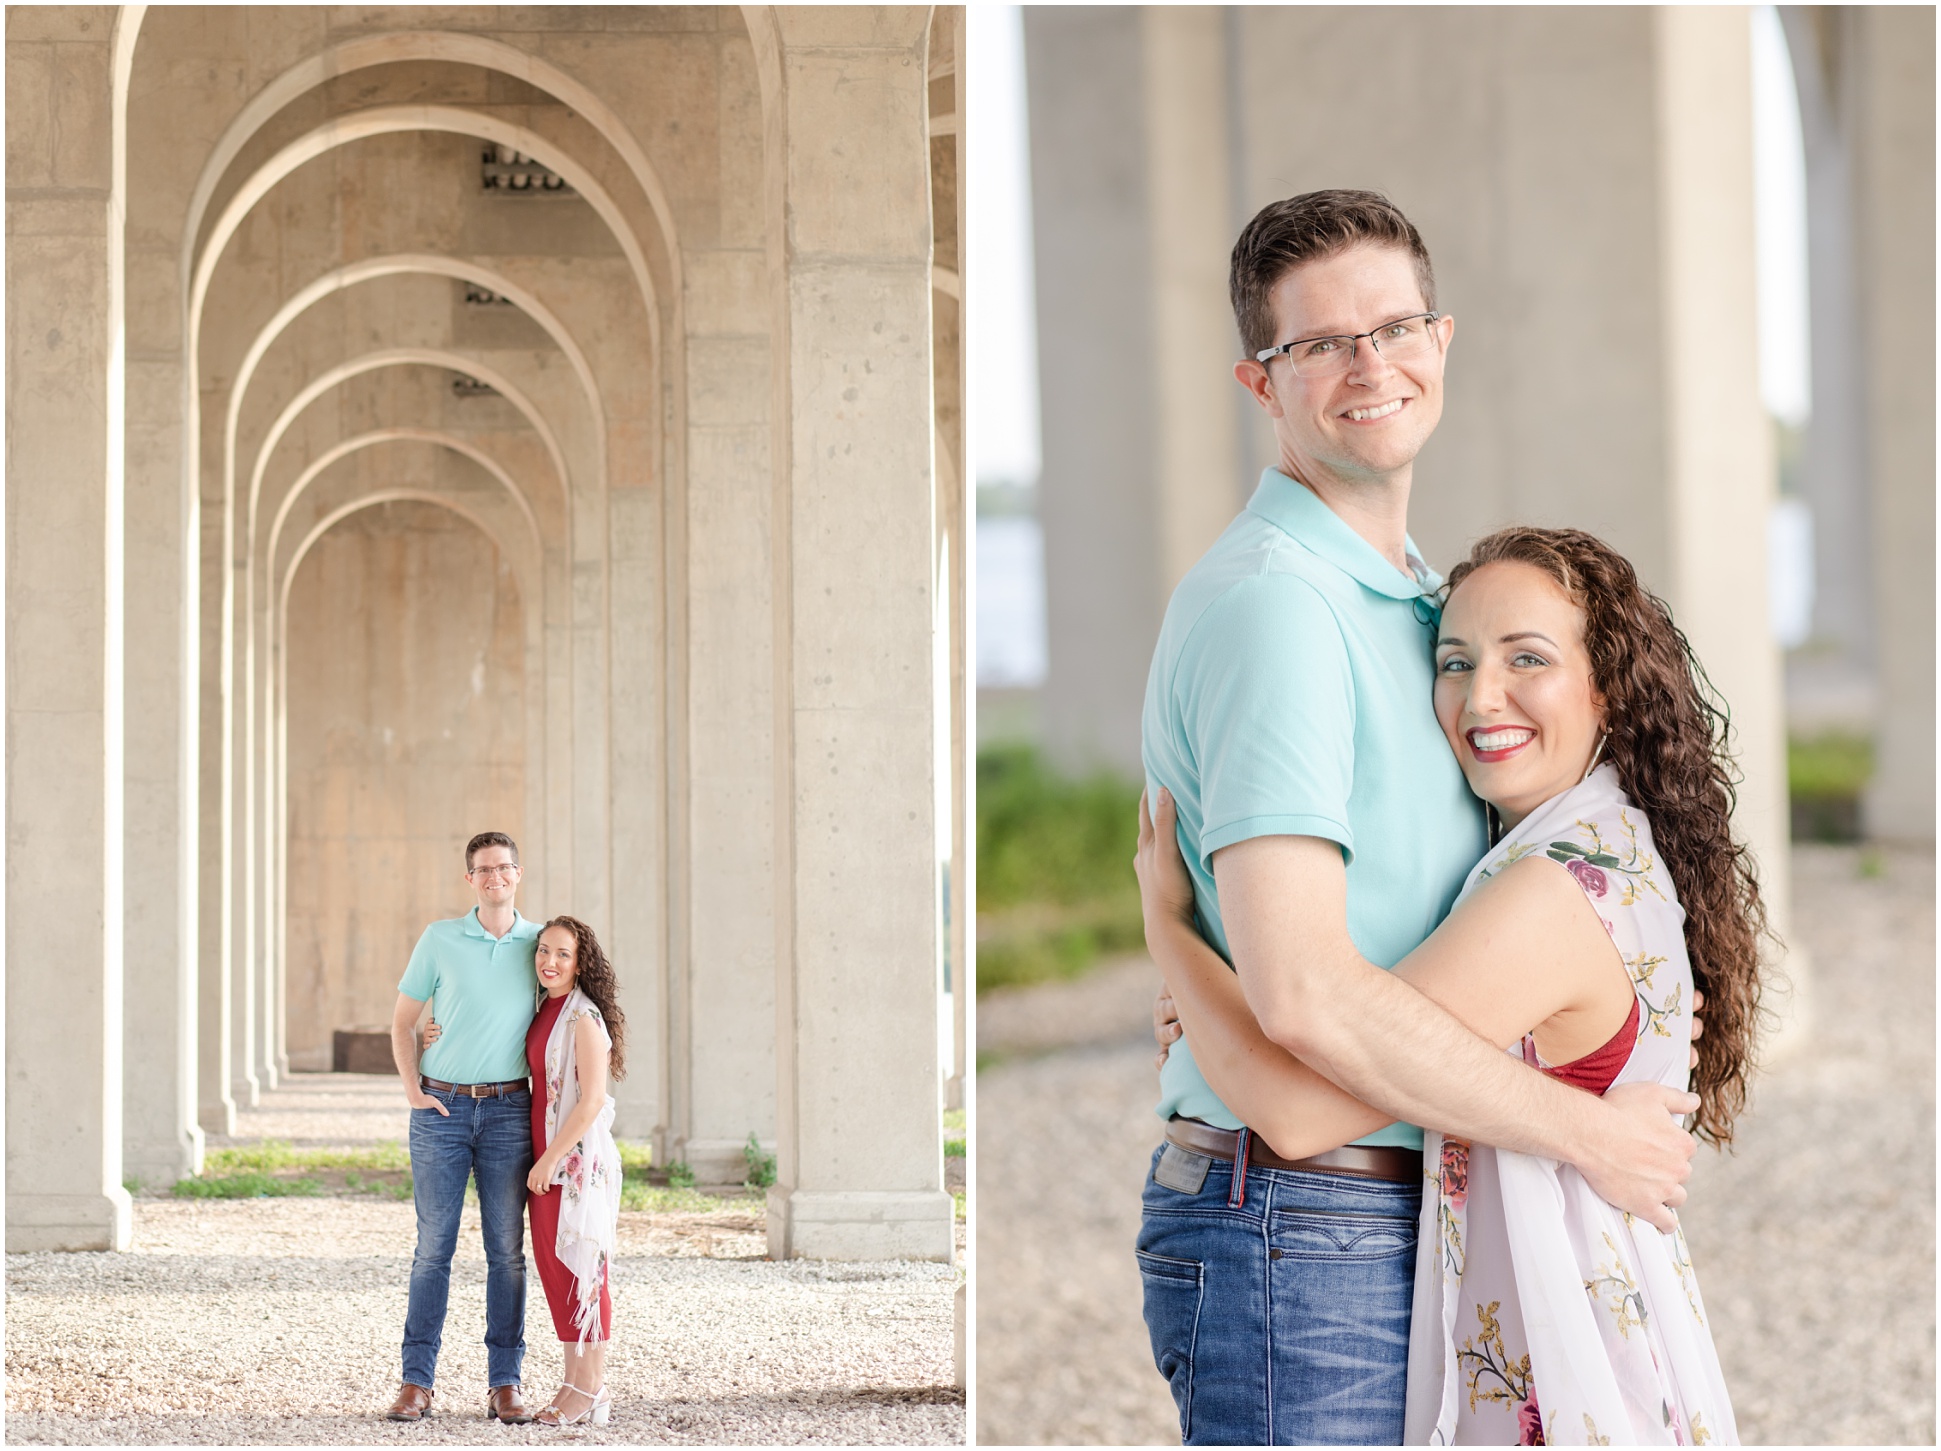 Two Images of an engaged couple under the Hanover Street Bridge